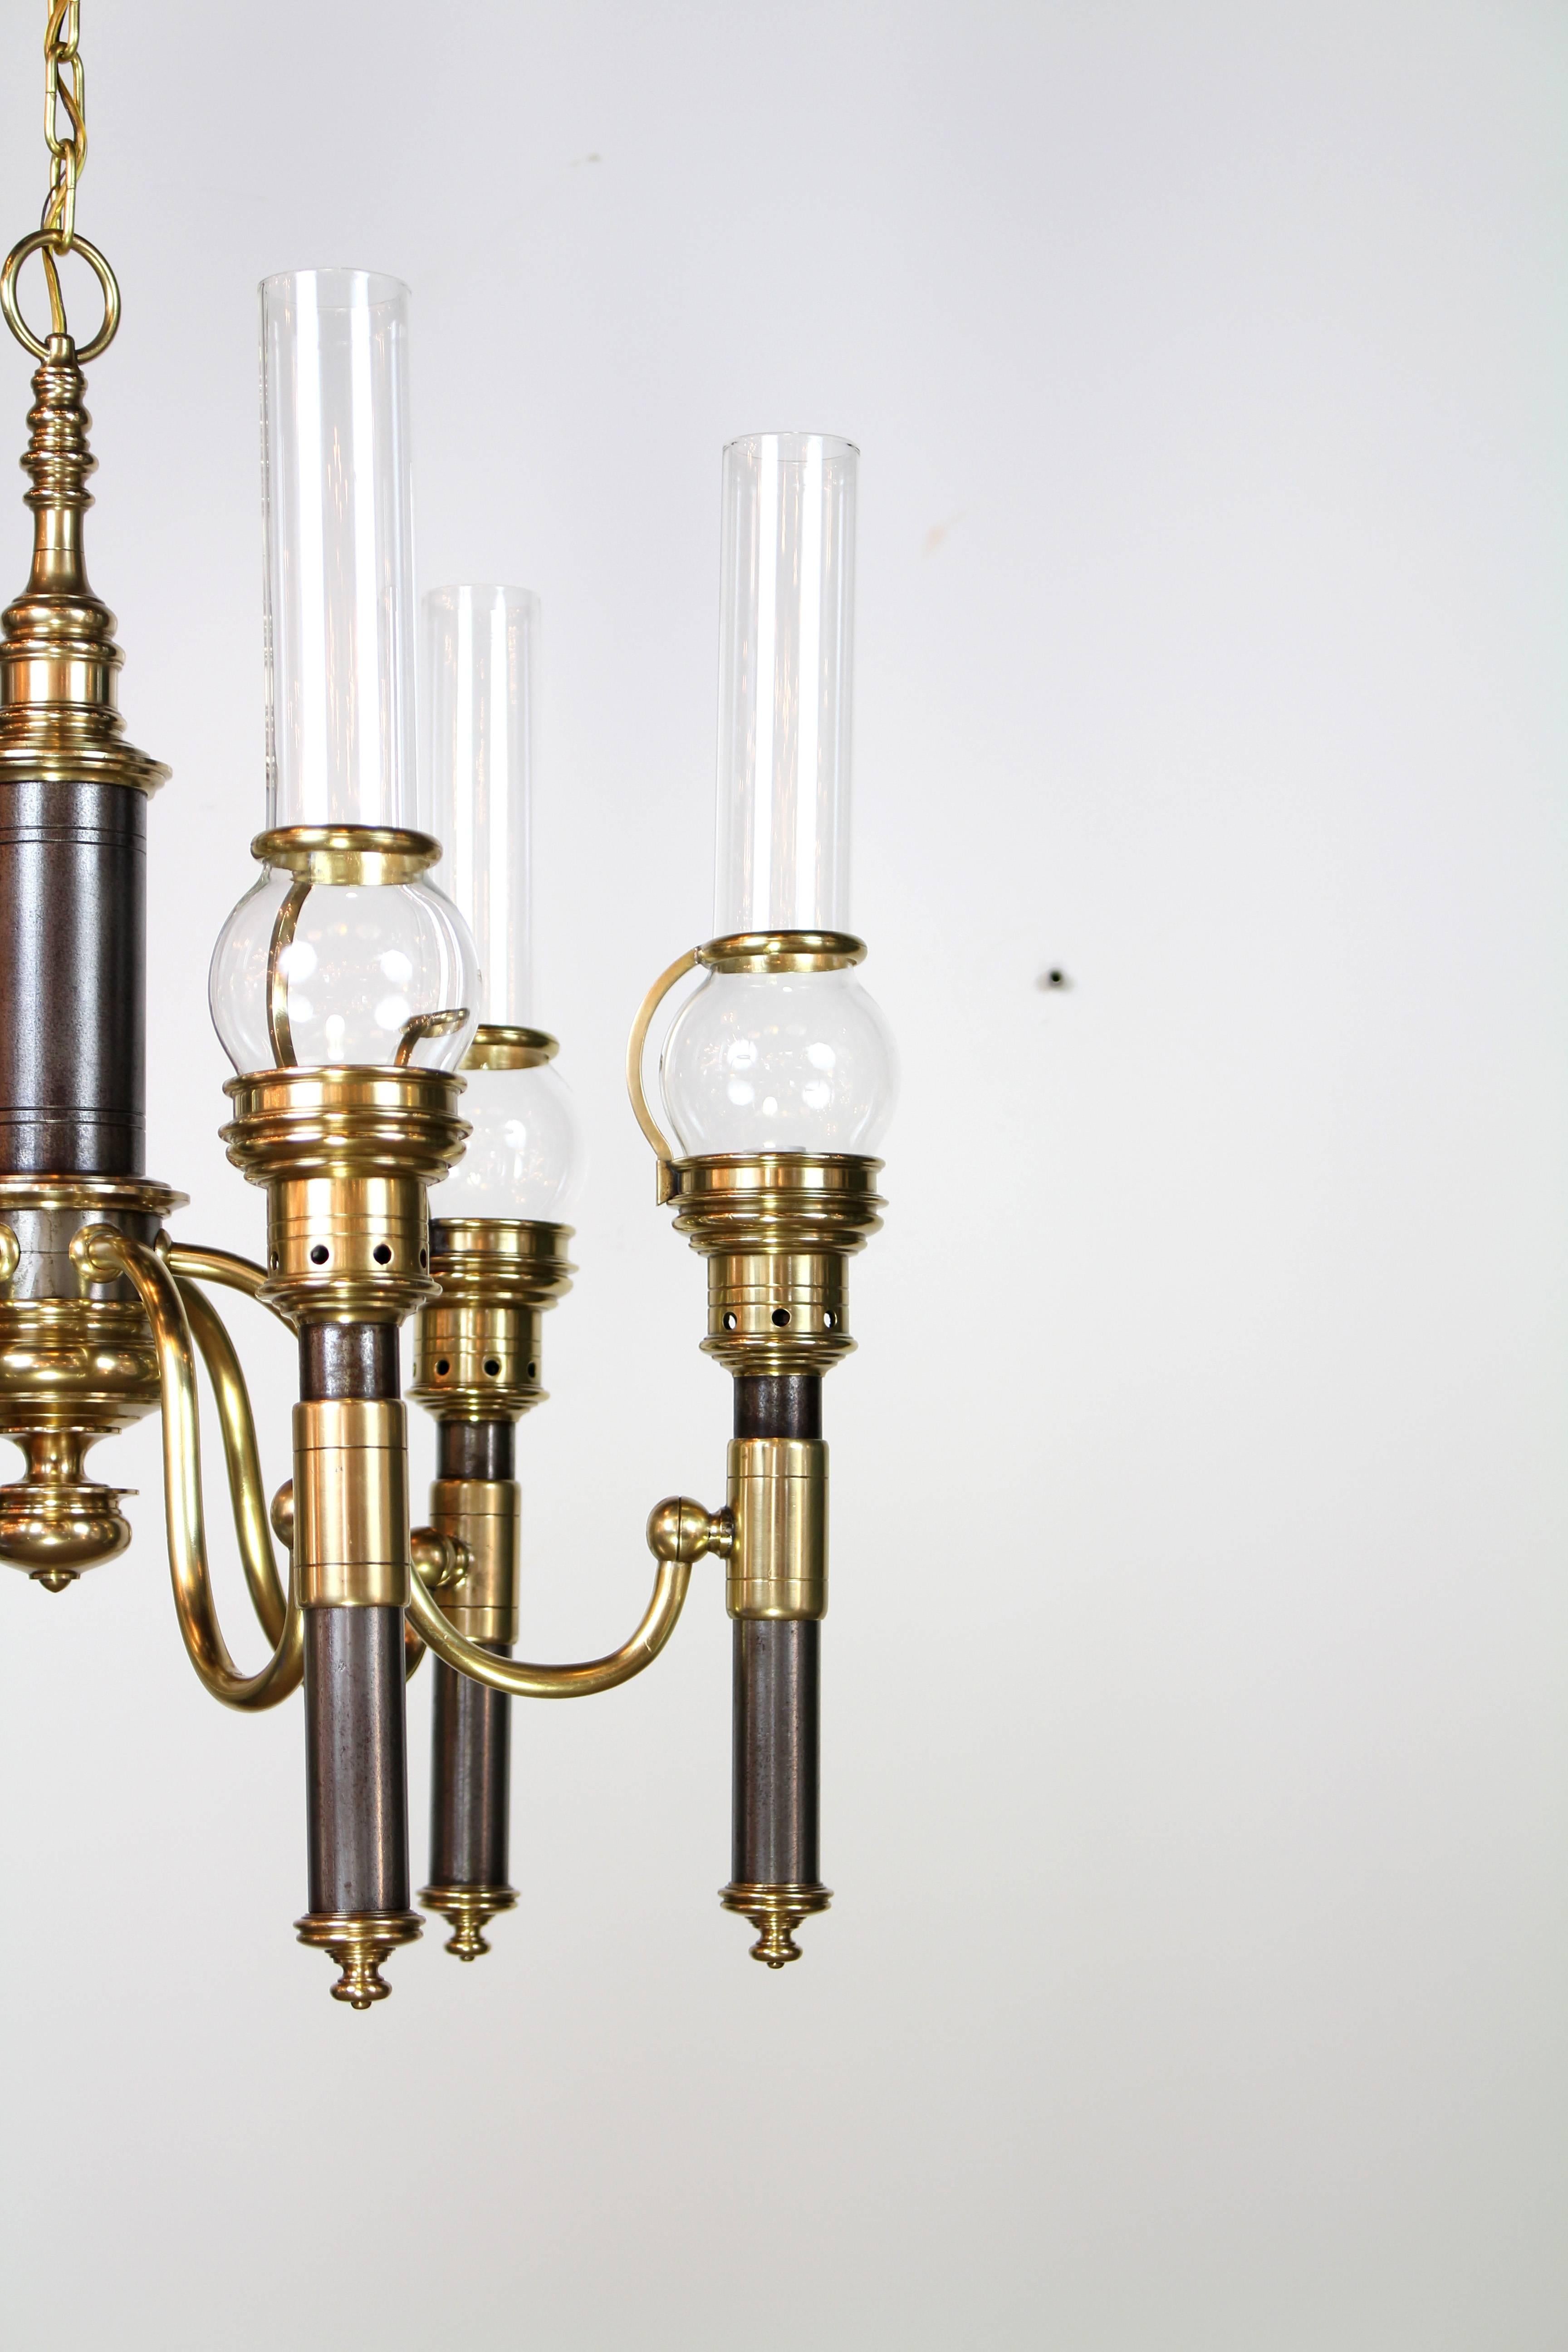 Chapman railroad style chandelier with six arms and glass chimneys. Two-tone steel and brass finish. The height listed is the minimum total drop with chain and canopy, chandelier itself is 25